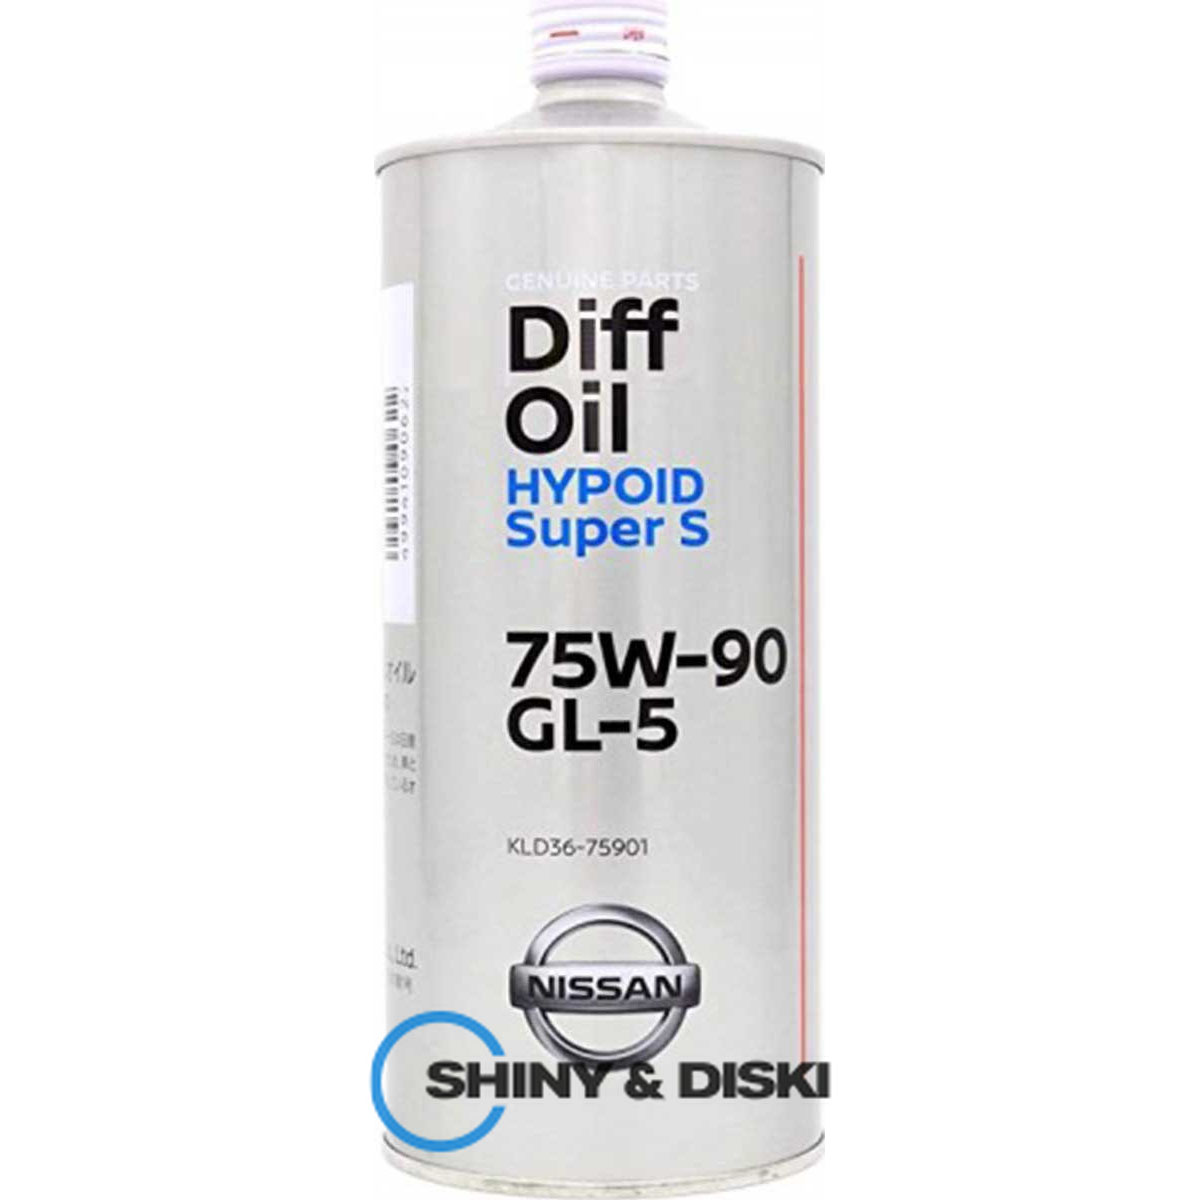 nissan diff oil hypoid super s 75w-90 gl-5 (1 л)